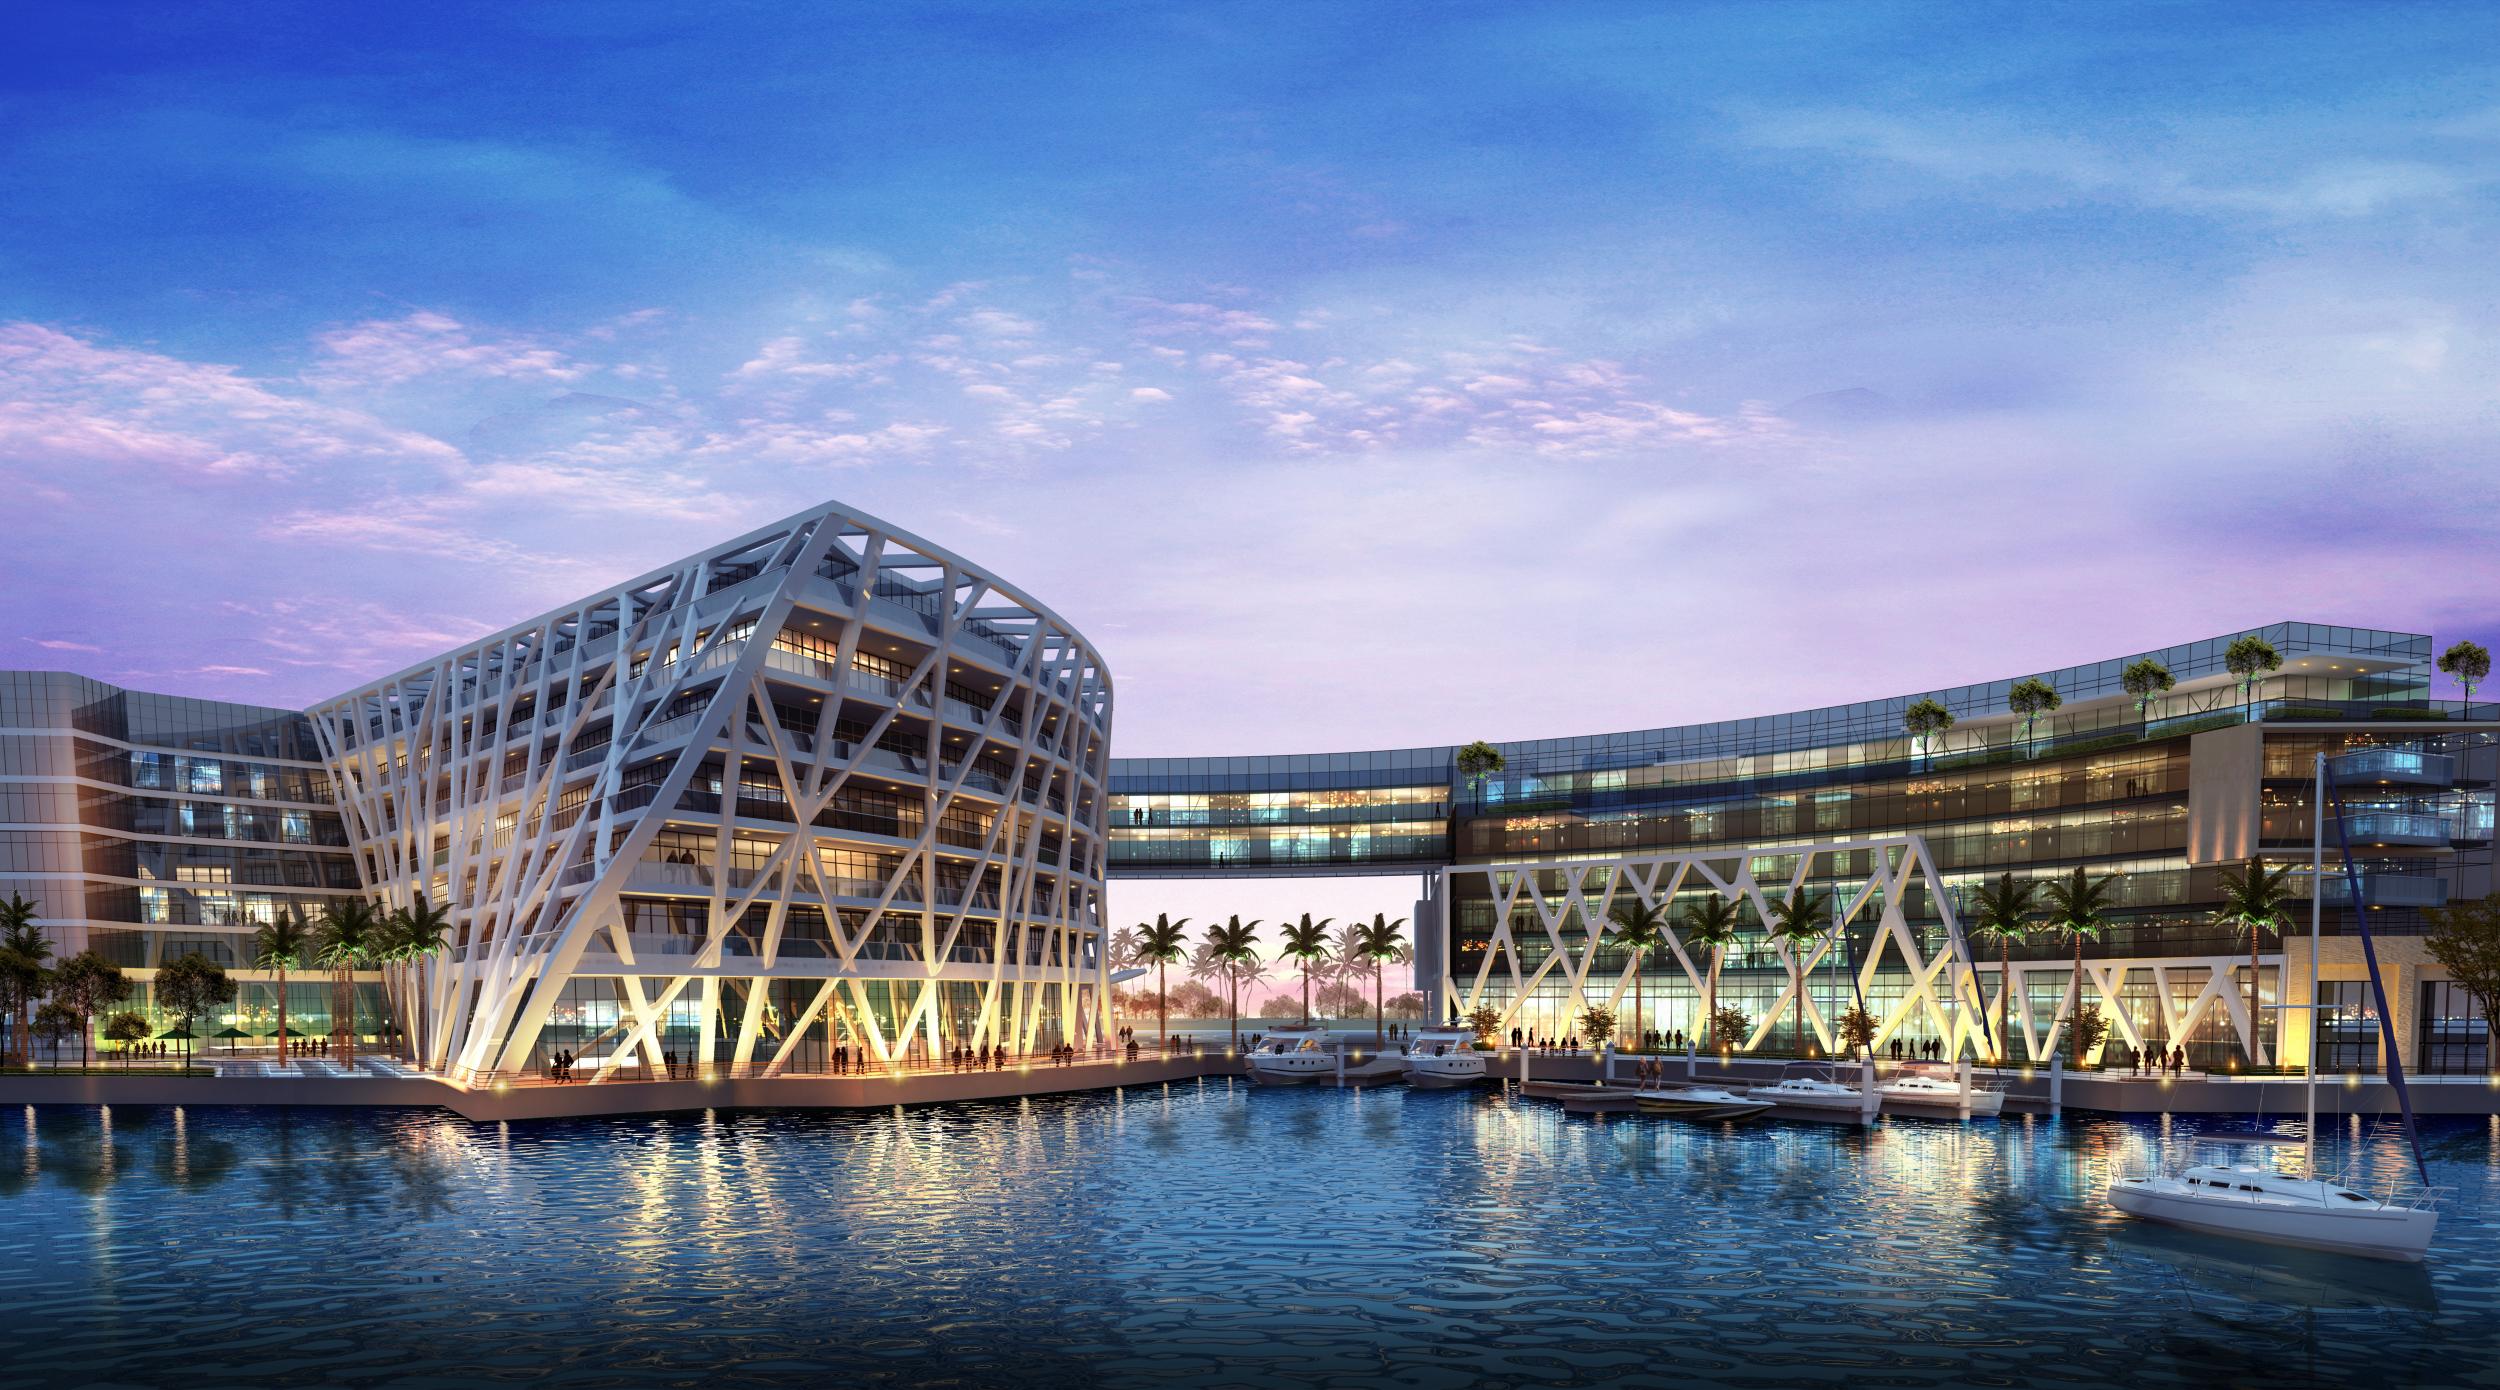 The industrial-chic exterior of the Abu Dhabi Edition